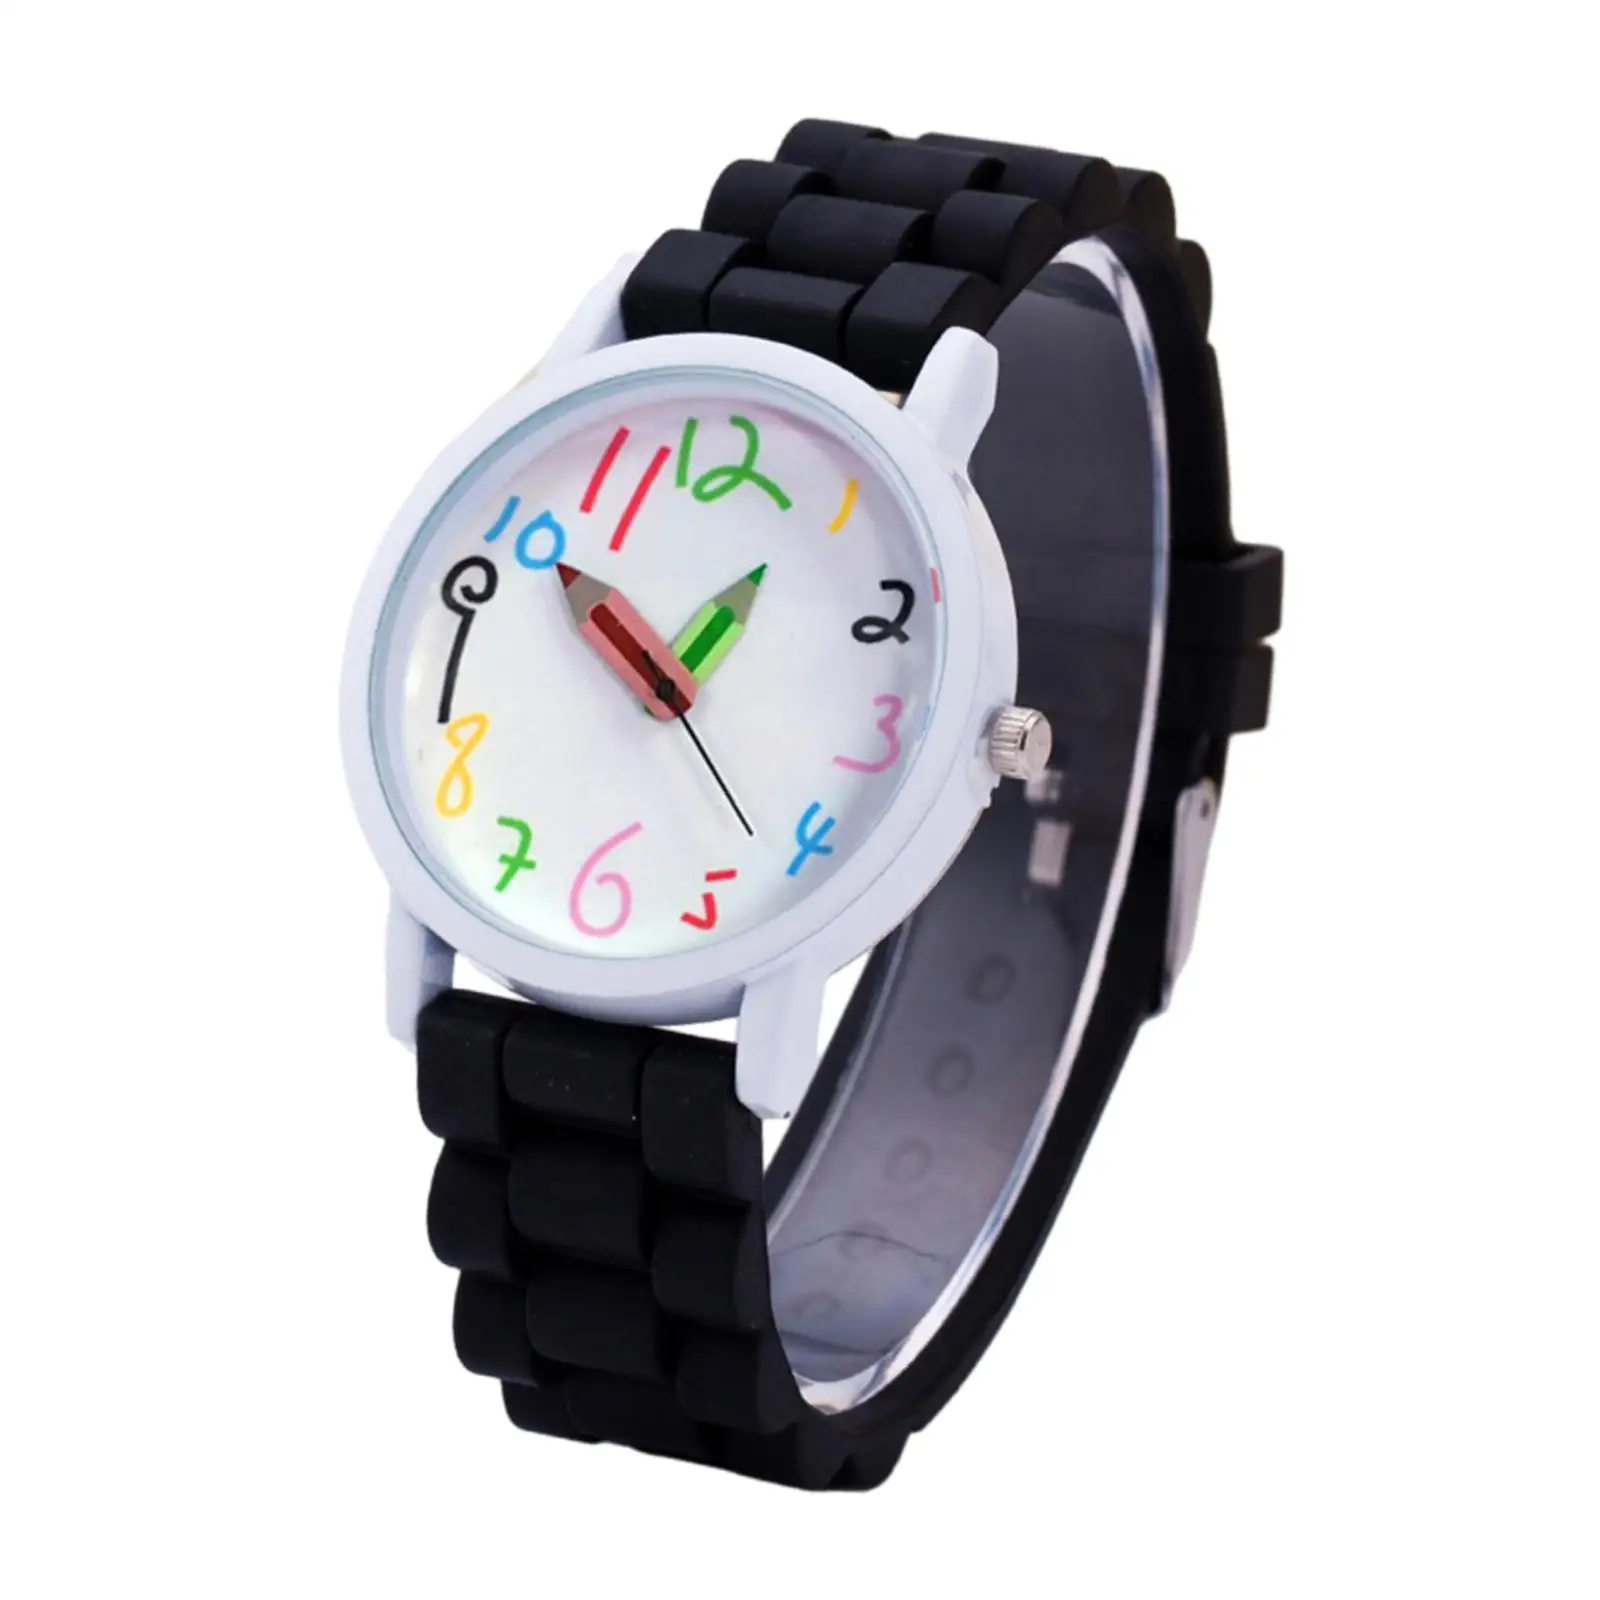 Silicone Watch for Women and Children, Strap Watch for Travel, Mochila